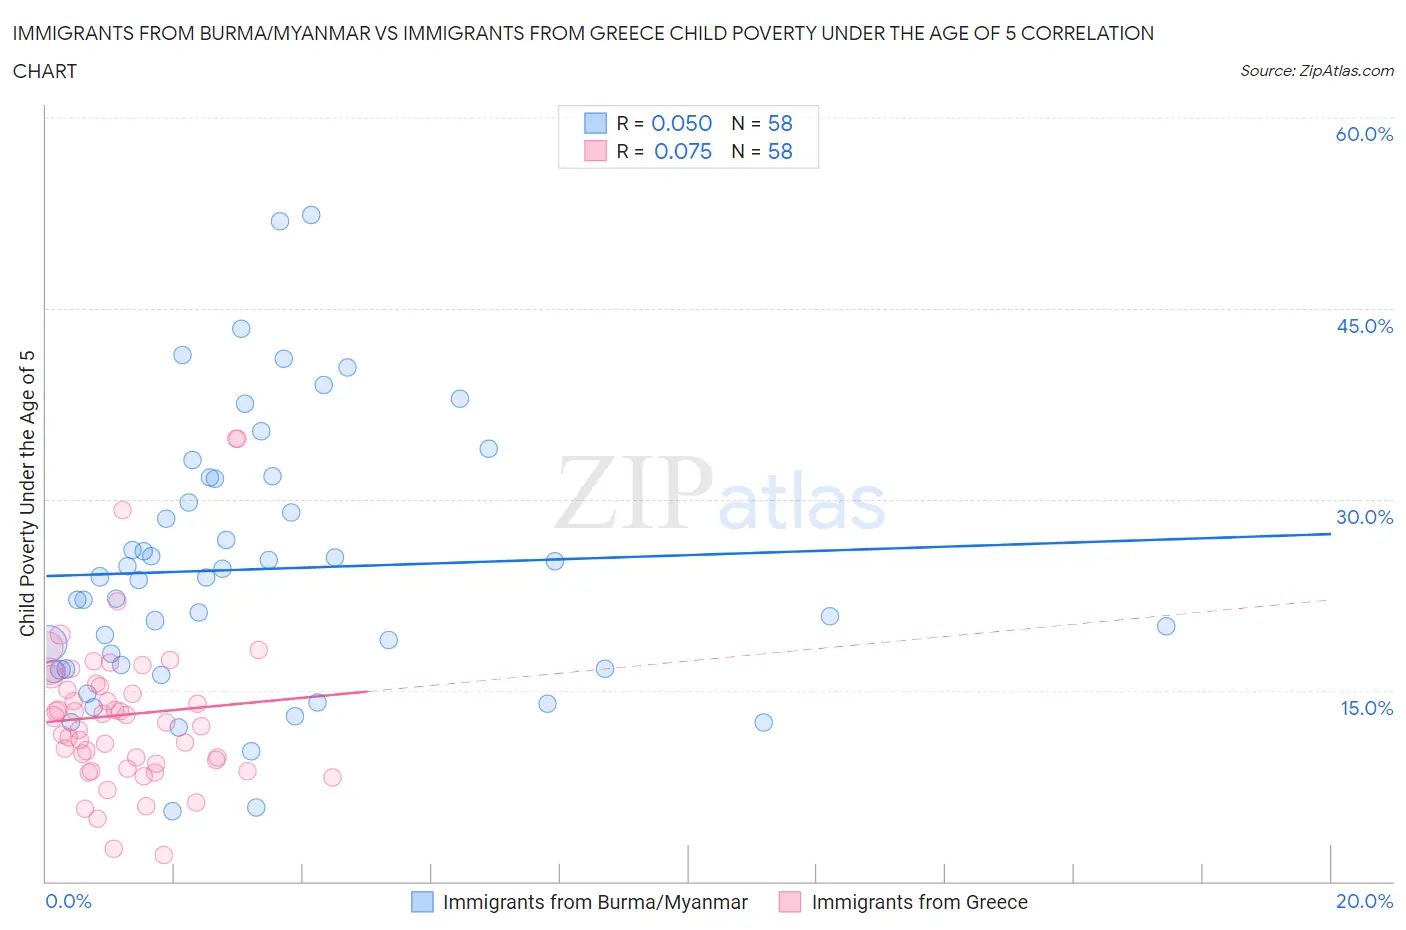 Immigrants from Burma/Myanmar vs Immigrants from Greece Child Poverty Under the Age of 5